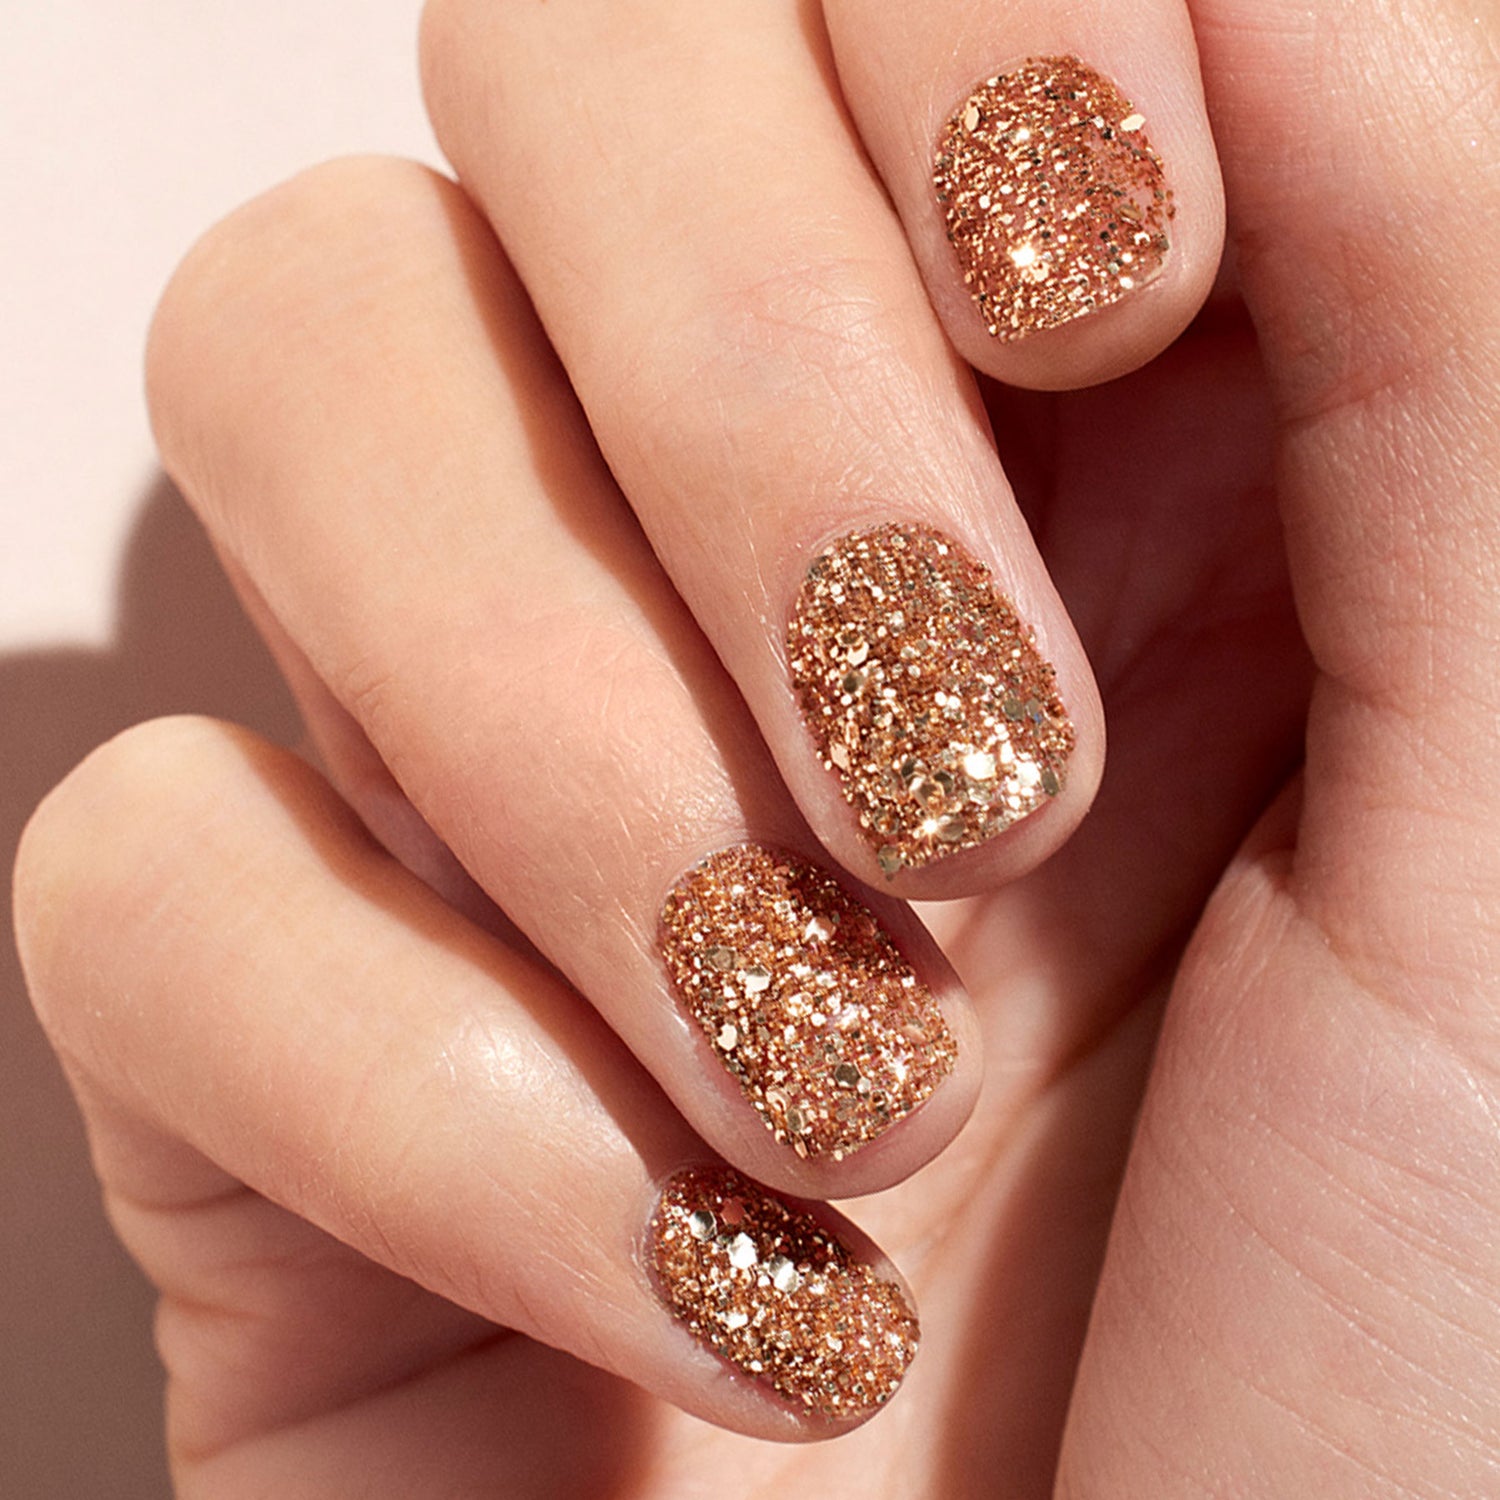 Duo Paillettes Rose Gold &amp; Glazed